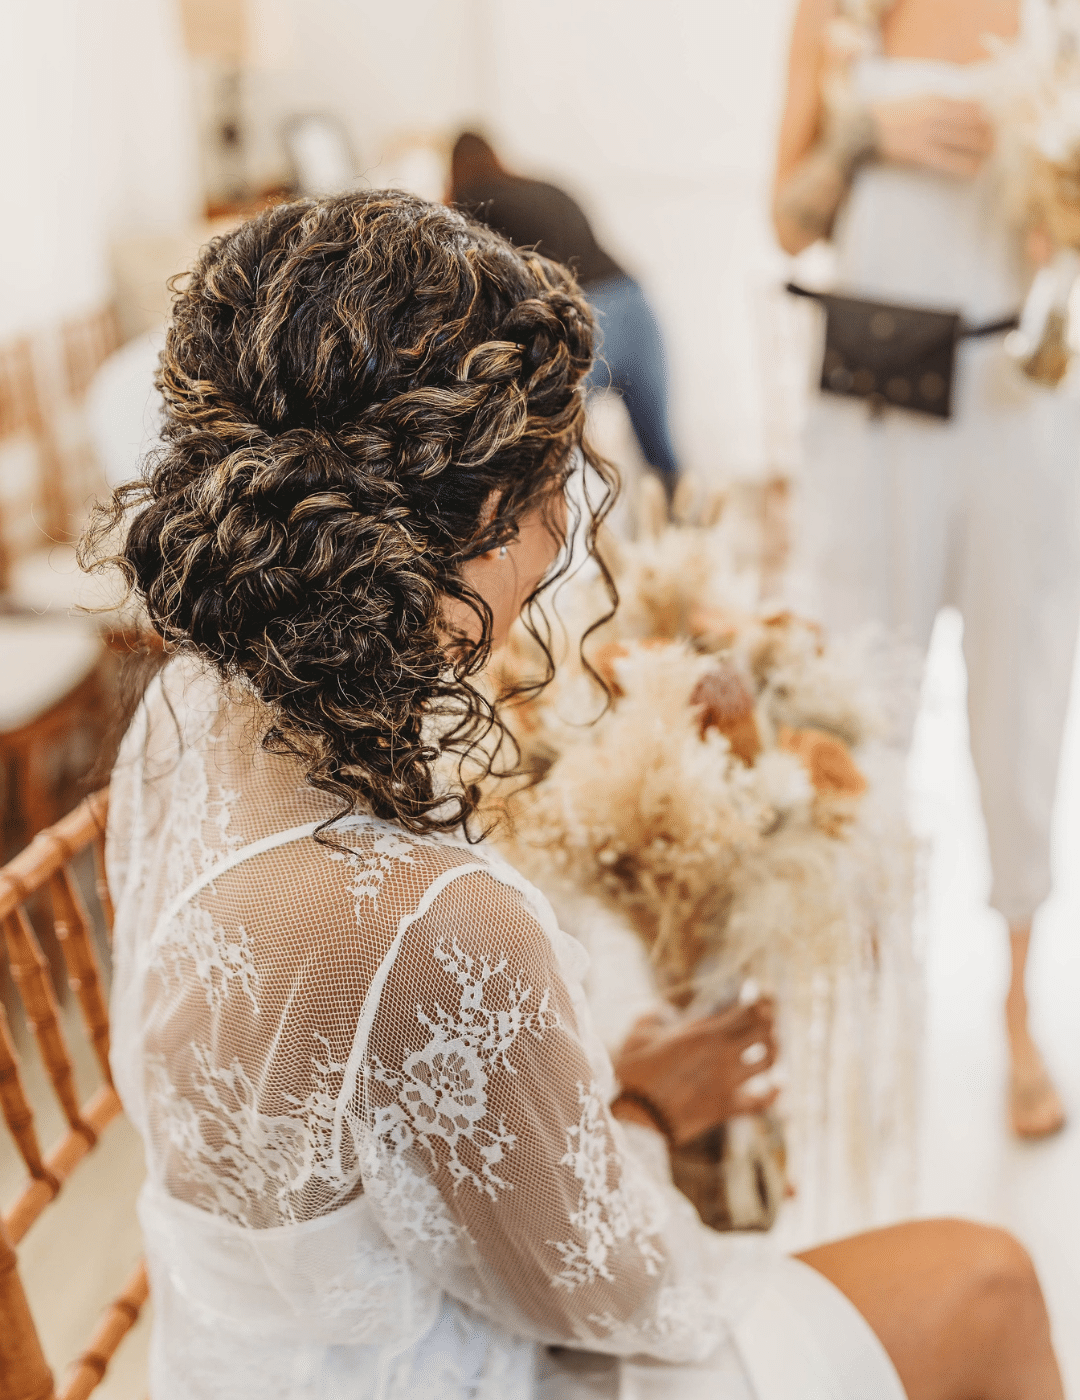 naturally curly hair up do on bride